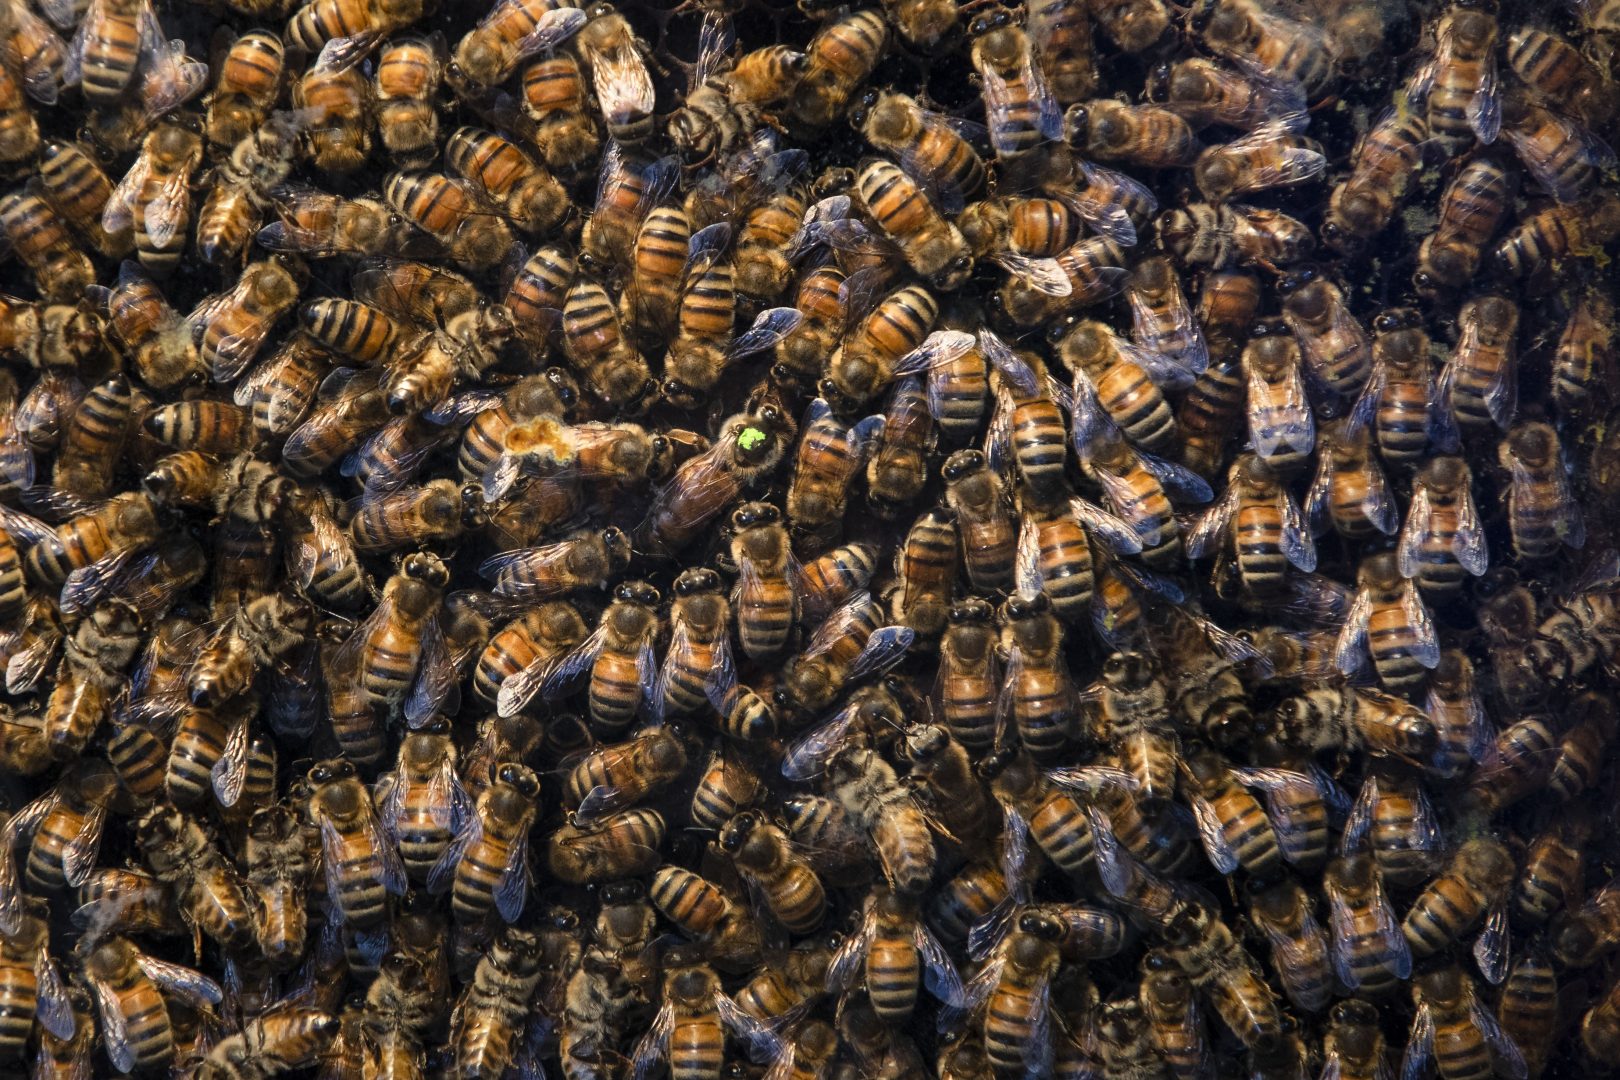 Honey bees move about in their display during the 104th Pennsylvania Farm Show in Harrisburg, Pa., Wednesday, Jan. 8, 2020. 